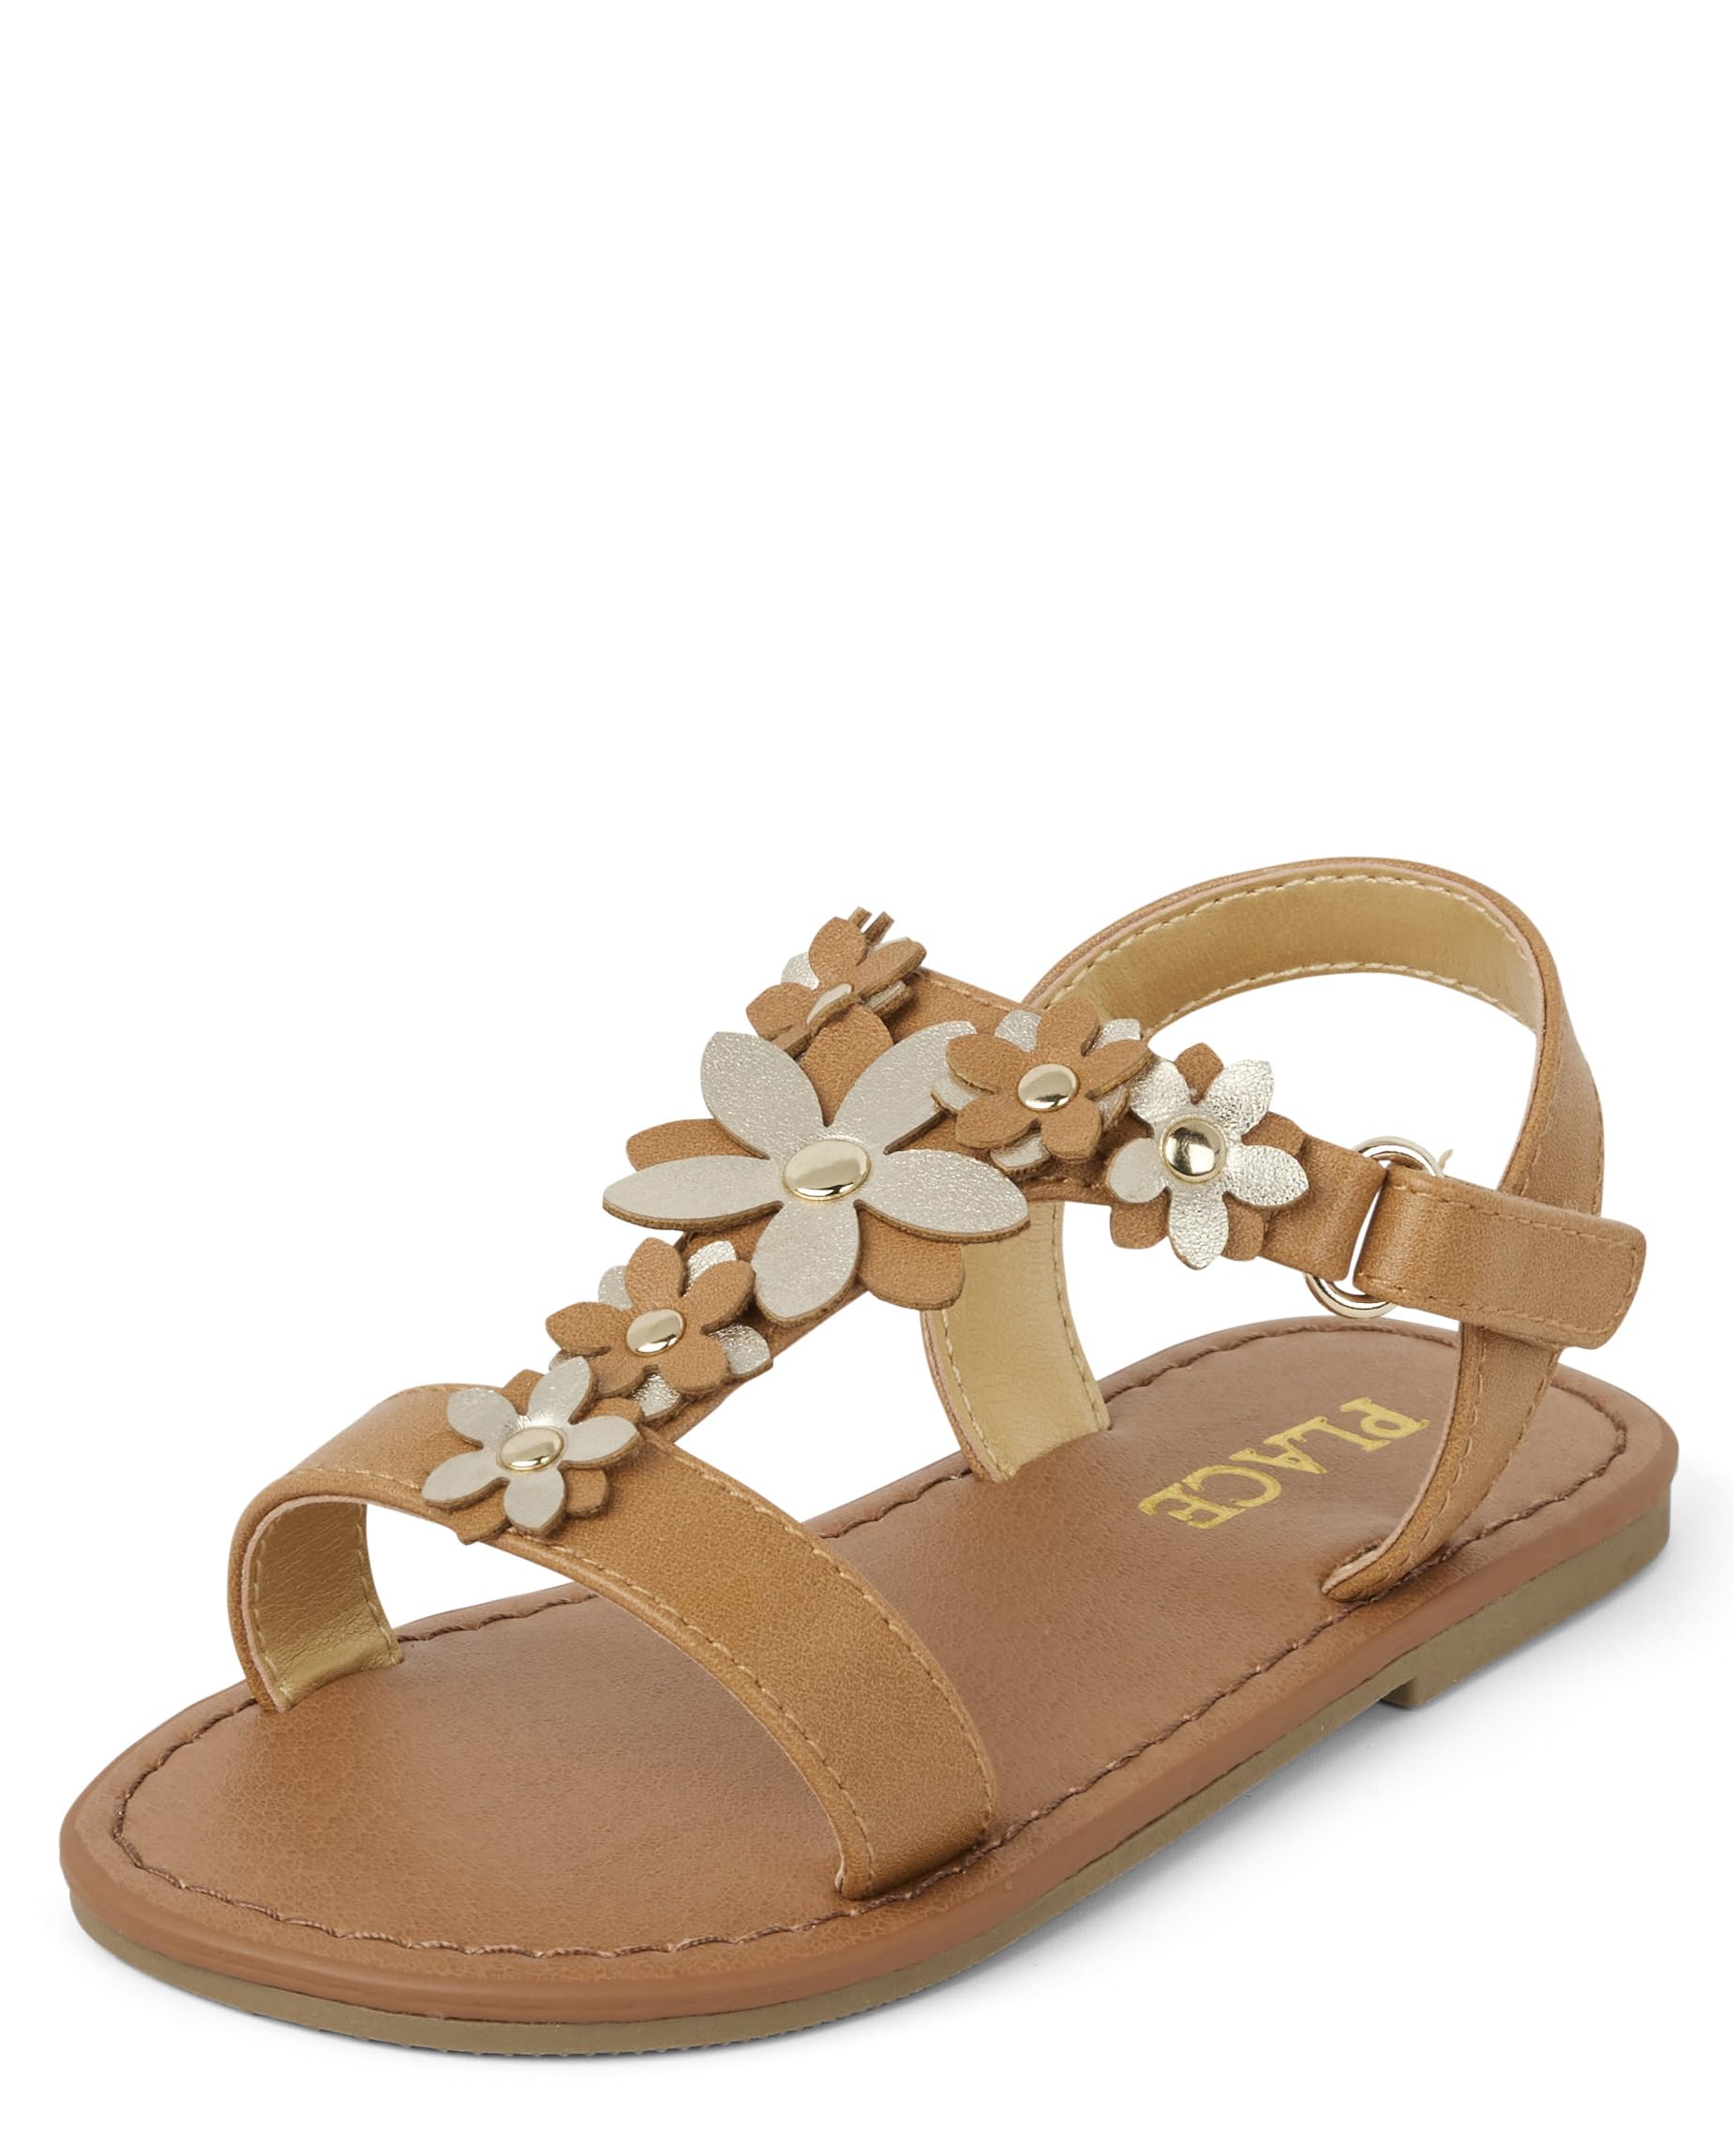 The Children's Place Girl's and Toddler Flat Sandals